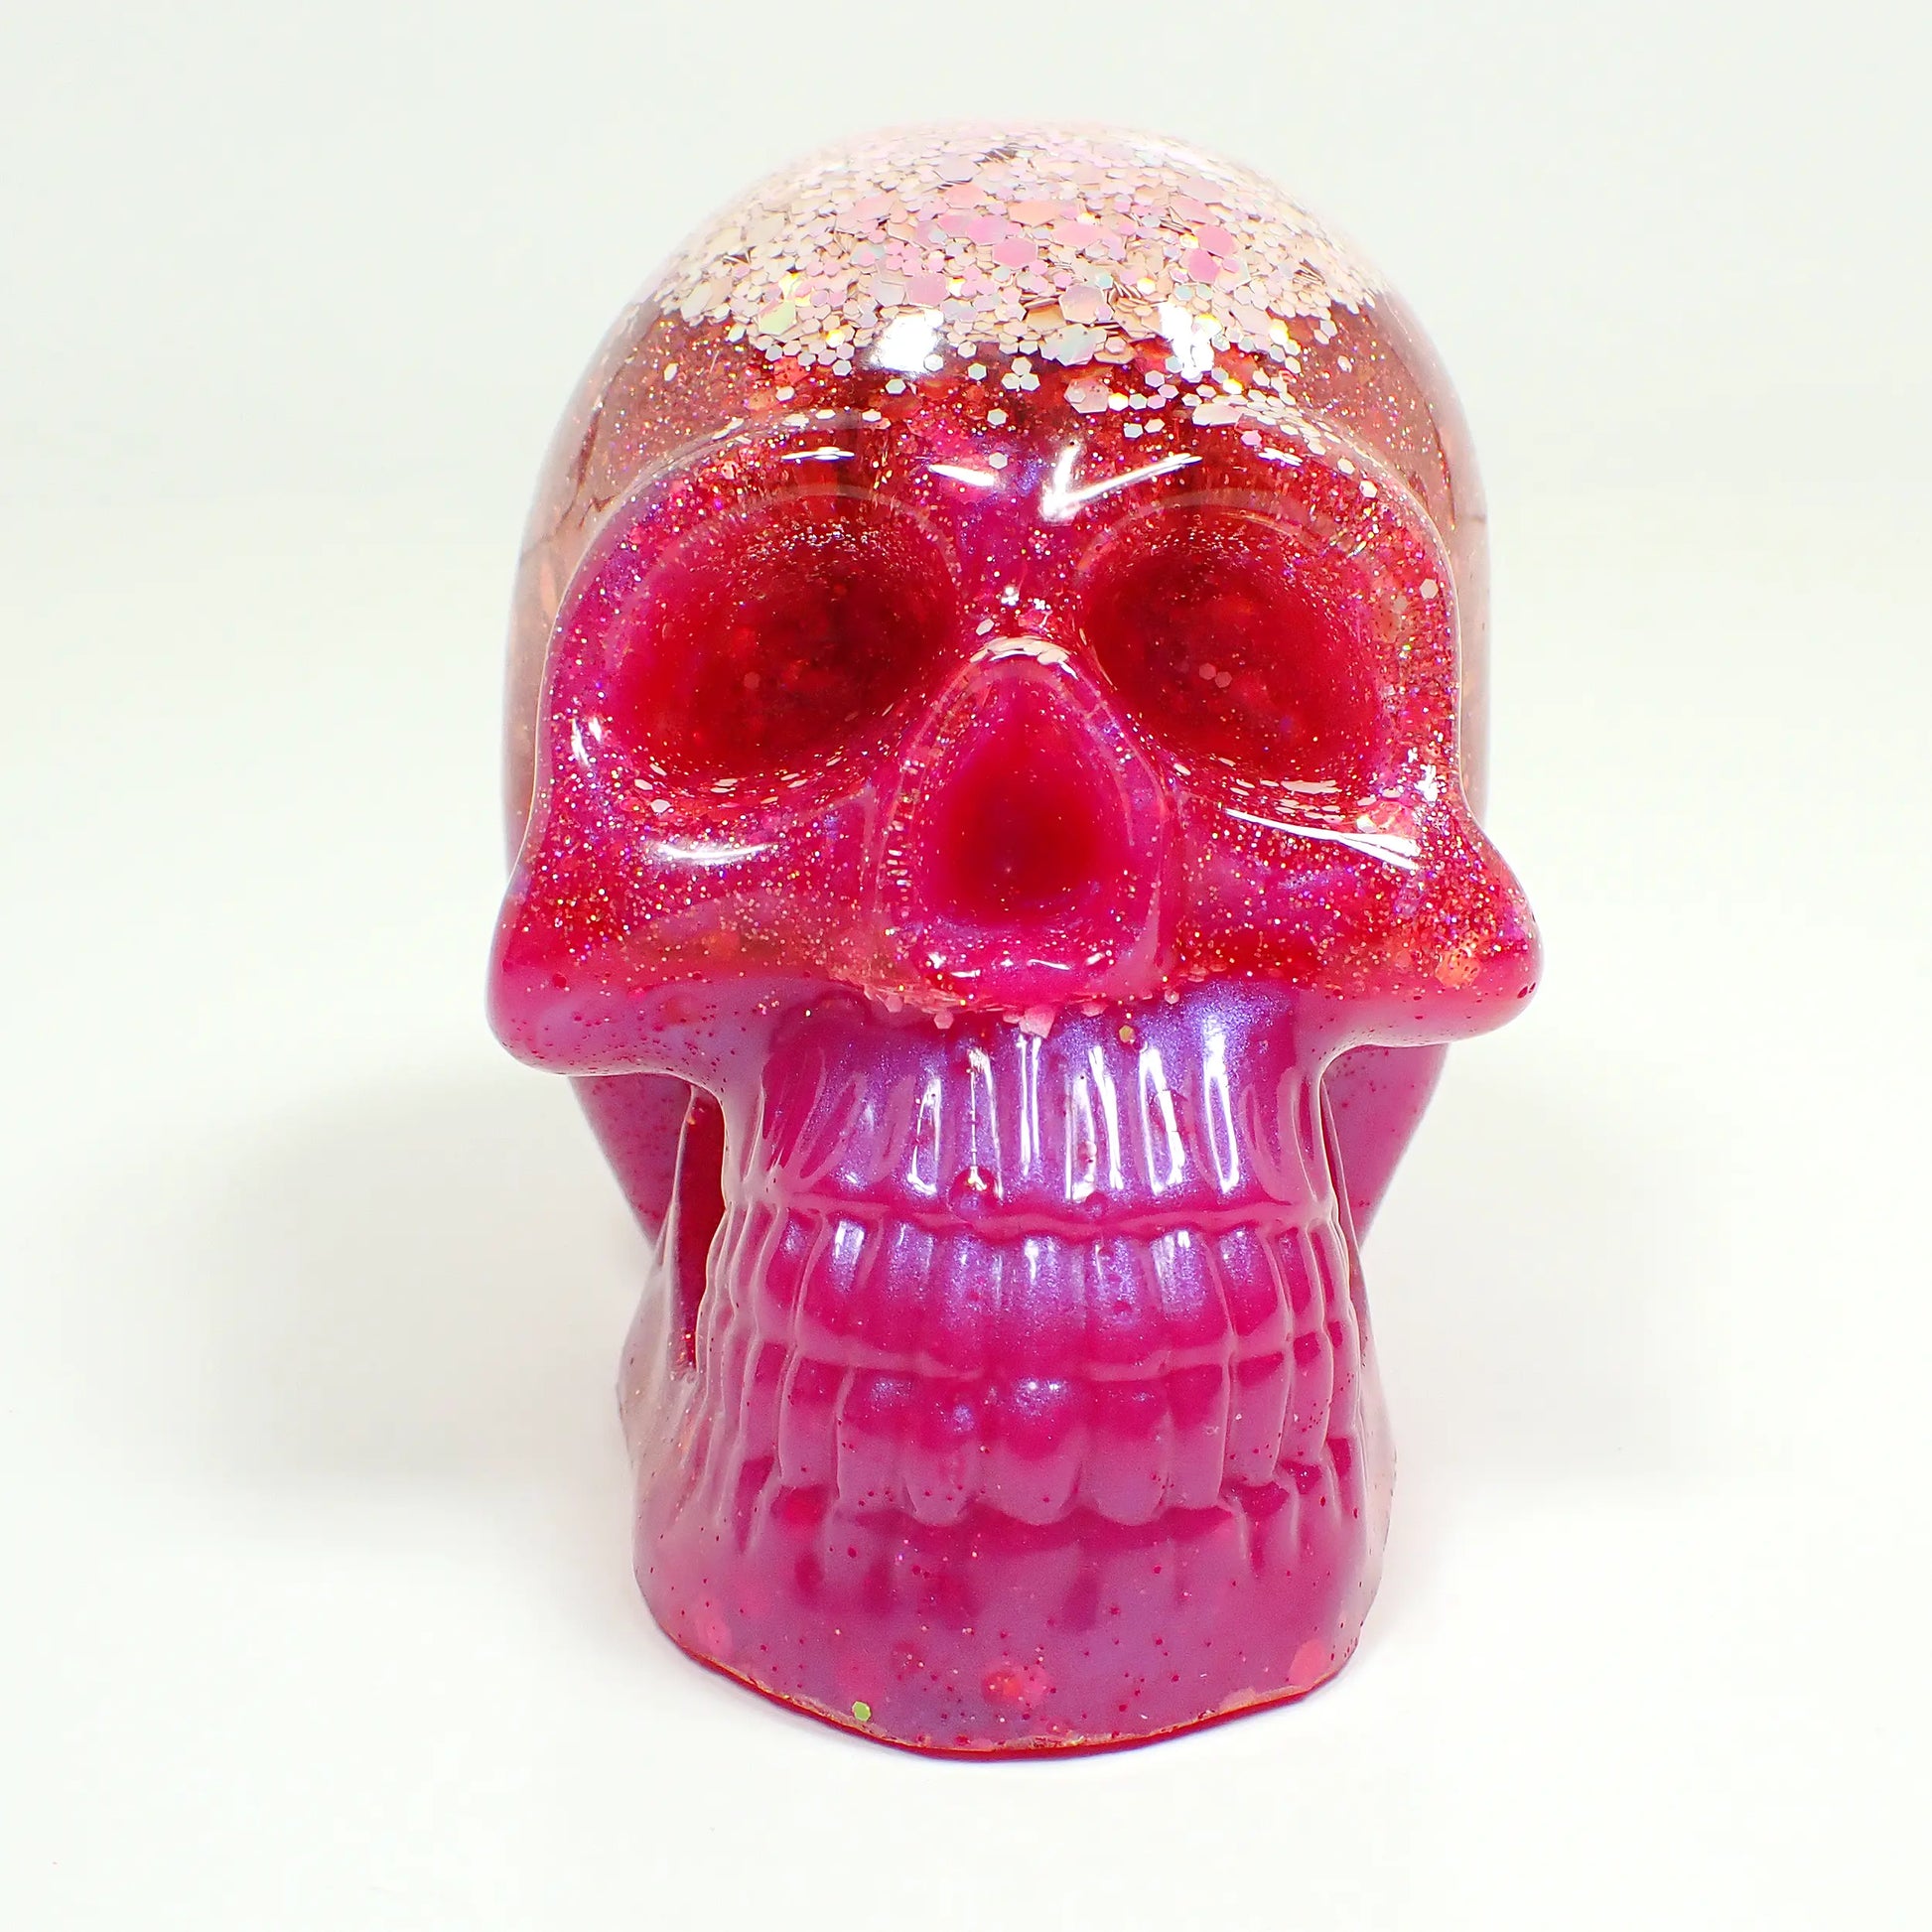 Front view of the handmade resin skull. There are two choices and this photo shows the one that has light pink iridescent glitter at the top followed by bright pink resin and iridescent glitter in the middle, and finally pearly bright pink resin at the bottom with some hints of glitter.